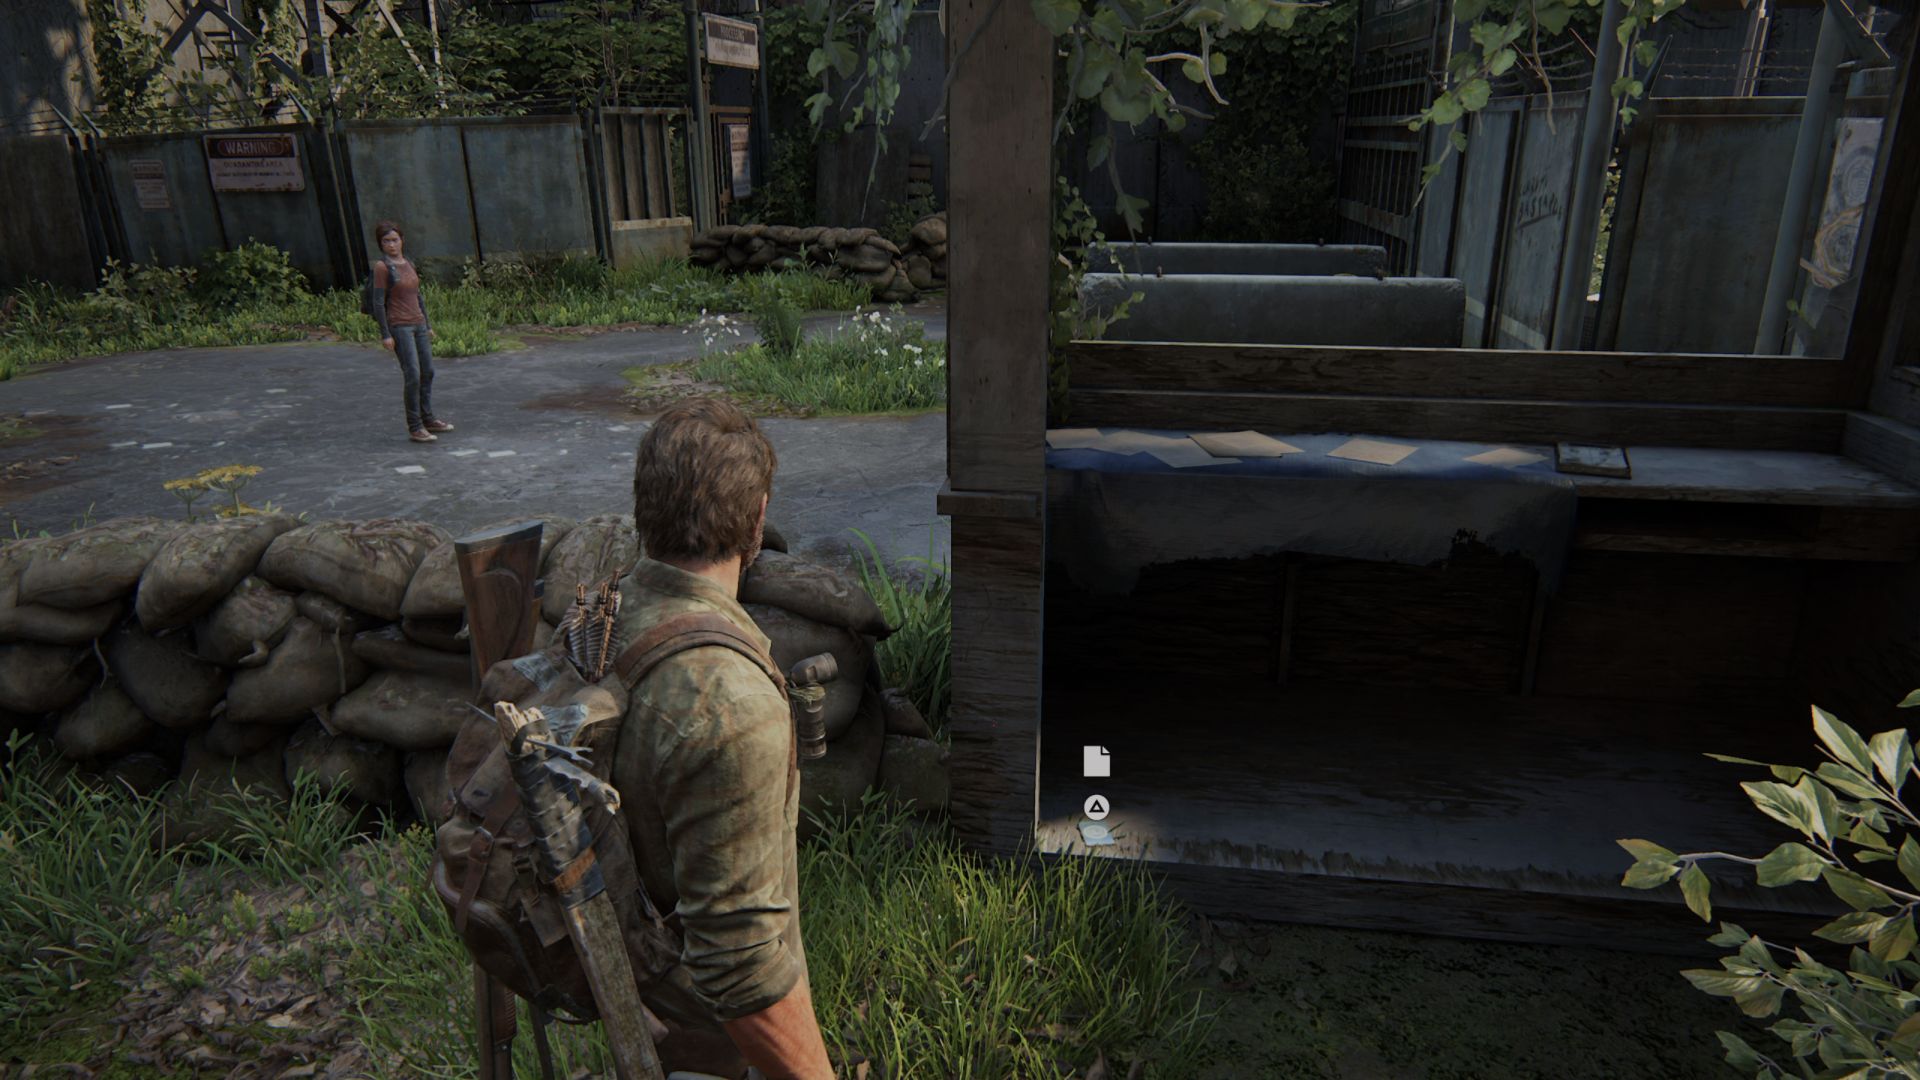 The Last of Us Part 1 Pittsburgh Collectible Locations: Joel can be seen looking at the collectible